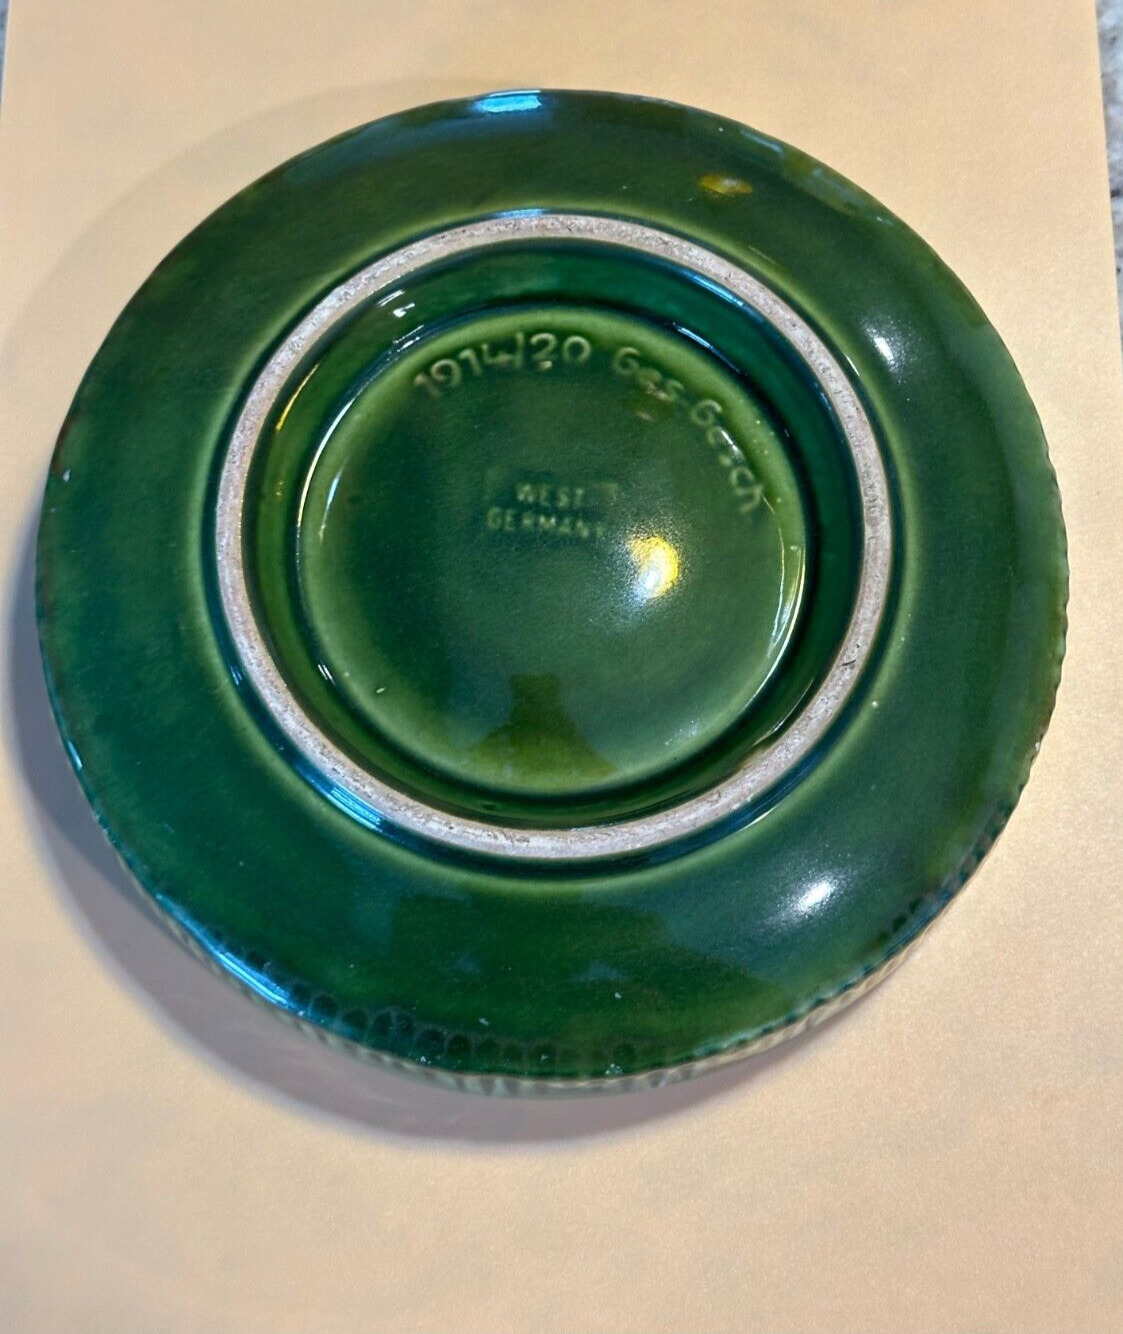 Vintage Ges Gesch West Germany, 1914/20 Dk Green Cigar Ashtray Candle Pottery